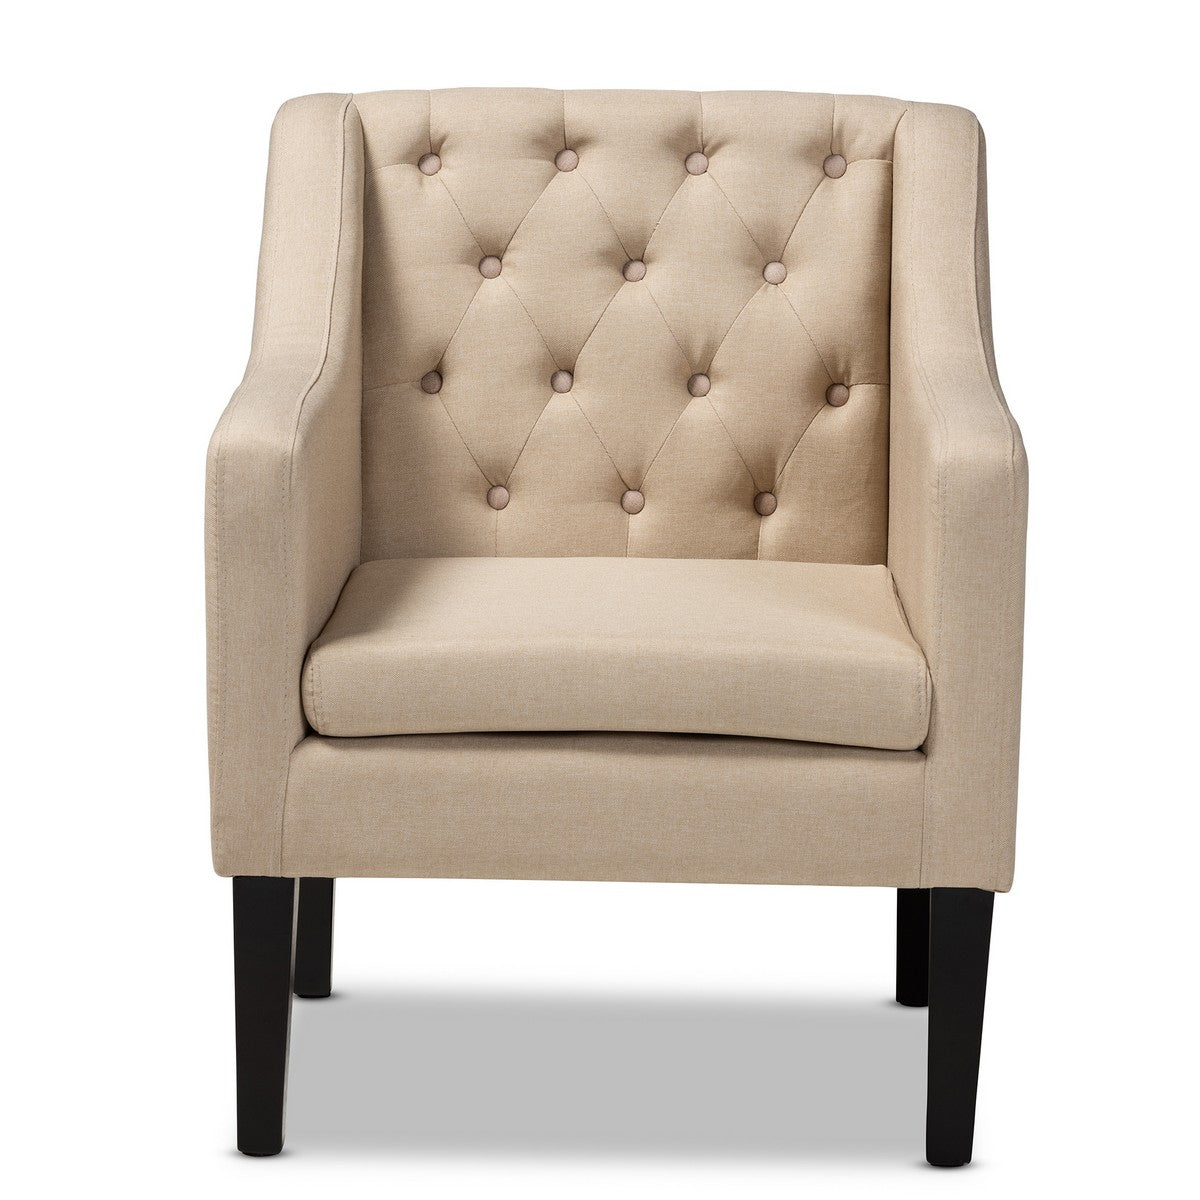 Baxton Studio Brittany Modern and Contemporary Beige Fabric Upholstered Club Chair